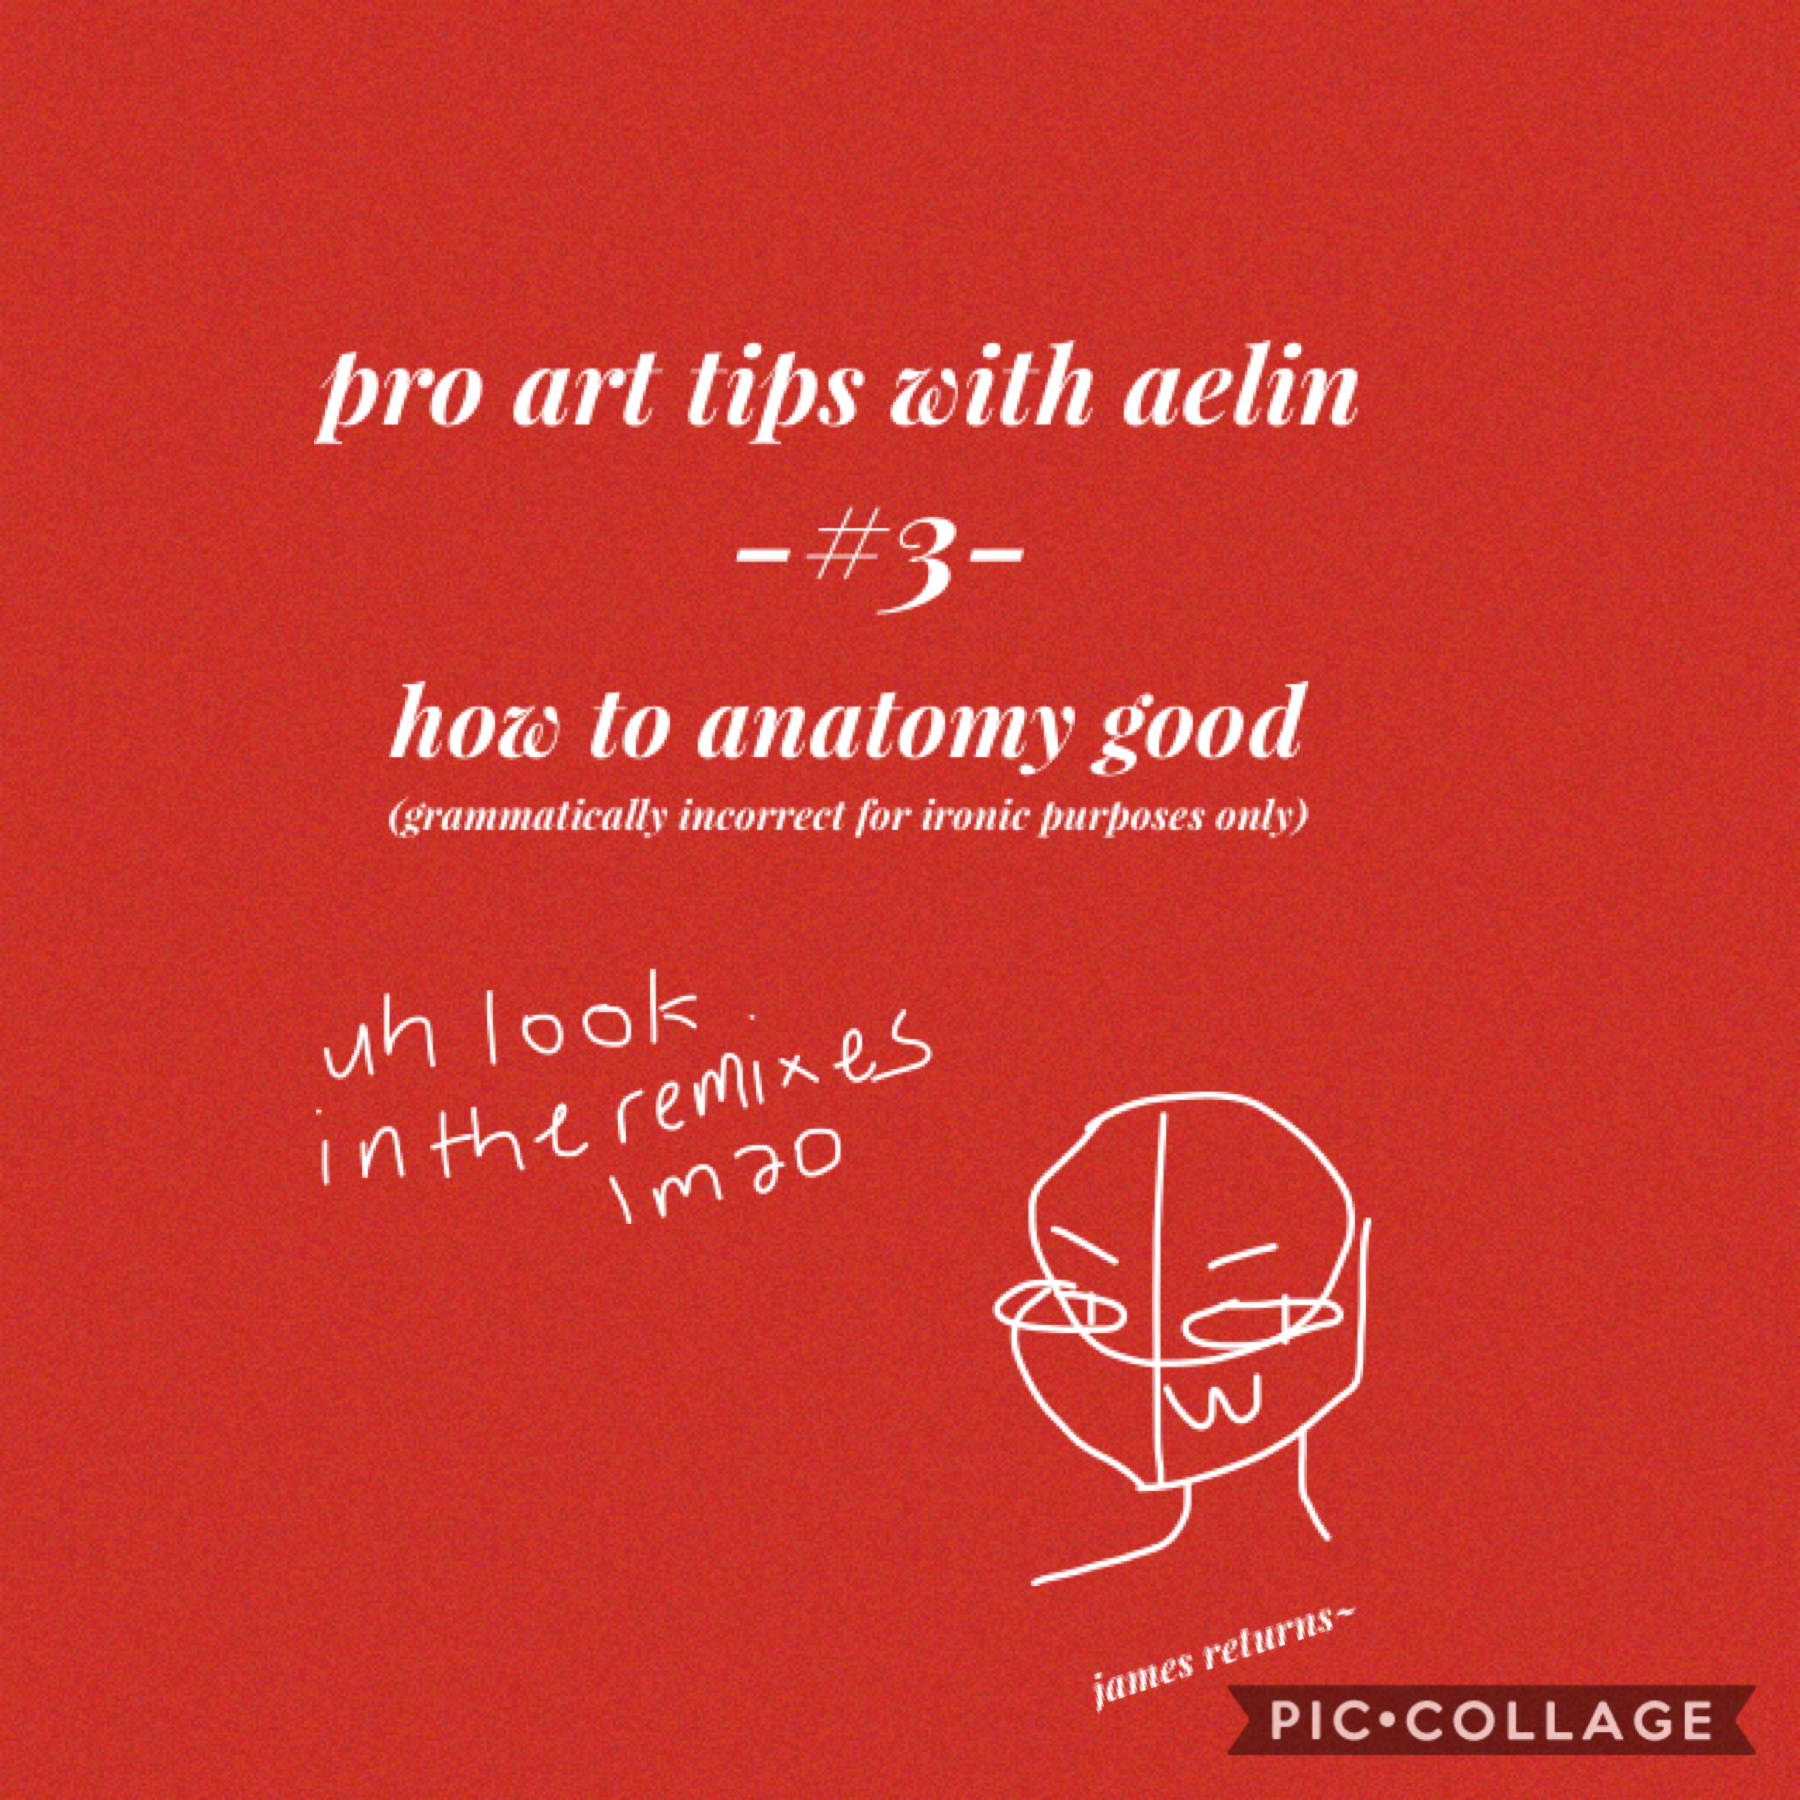 Tap

Since I apparently know how to do anatomy pretty decently, I thought I’d share my knowledge. If you have any questions, I may or may not be able to answer them :)